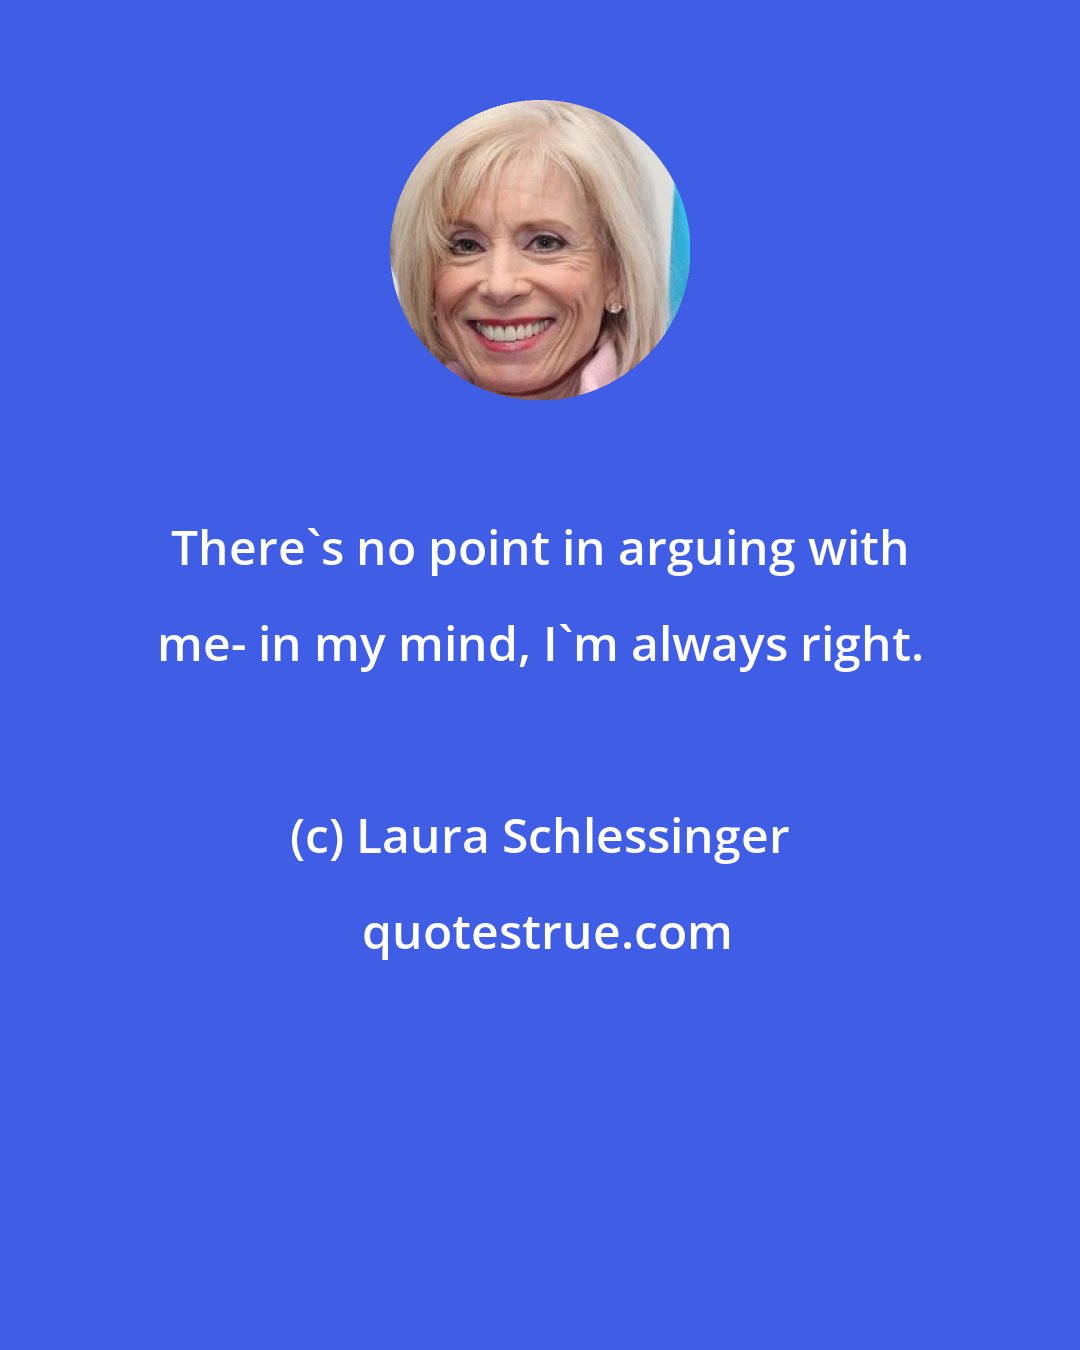 Laura Schlessinger: There's no point in arguing with me- in my mind, I'm always right.